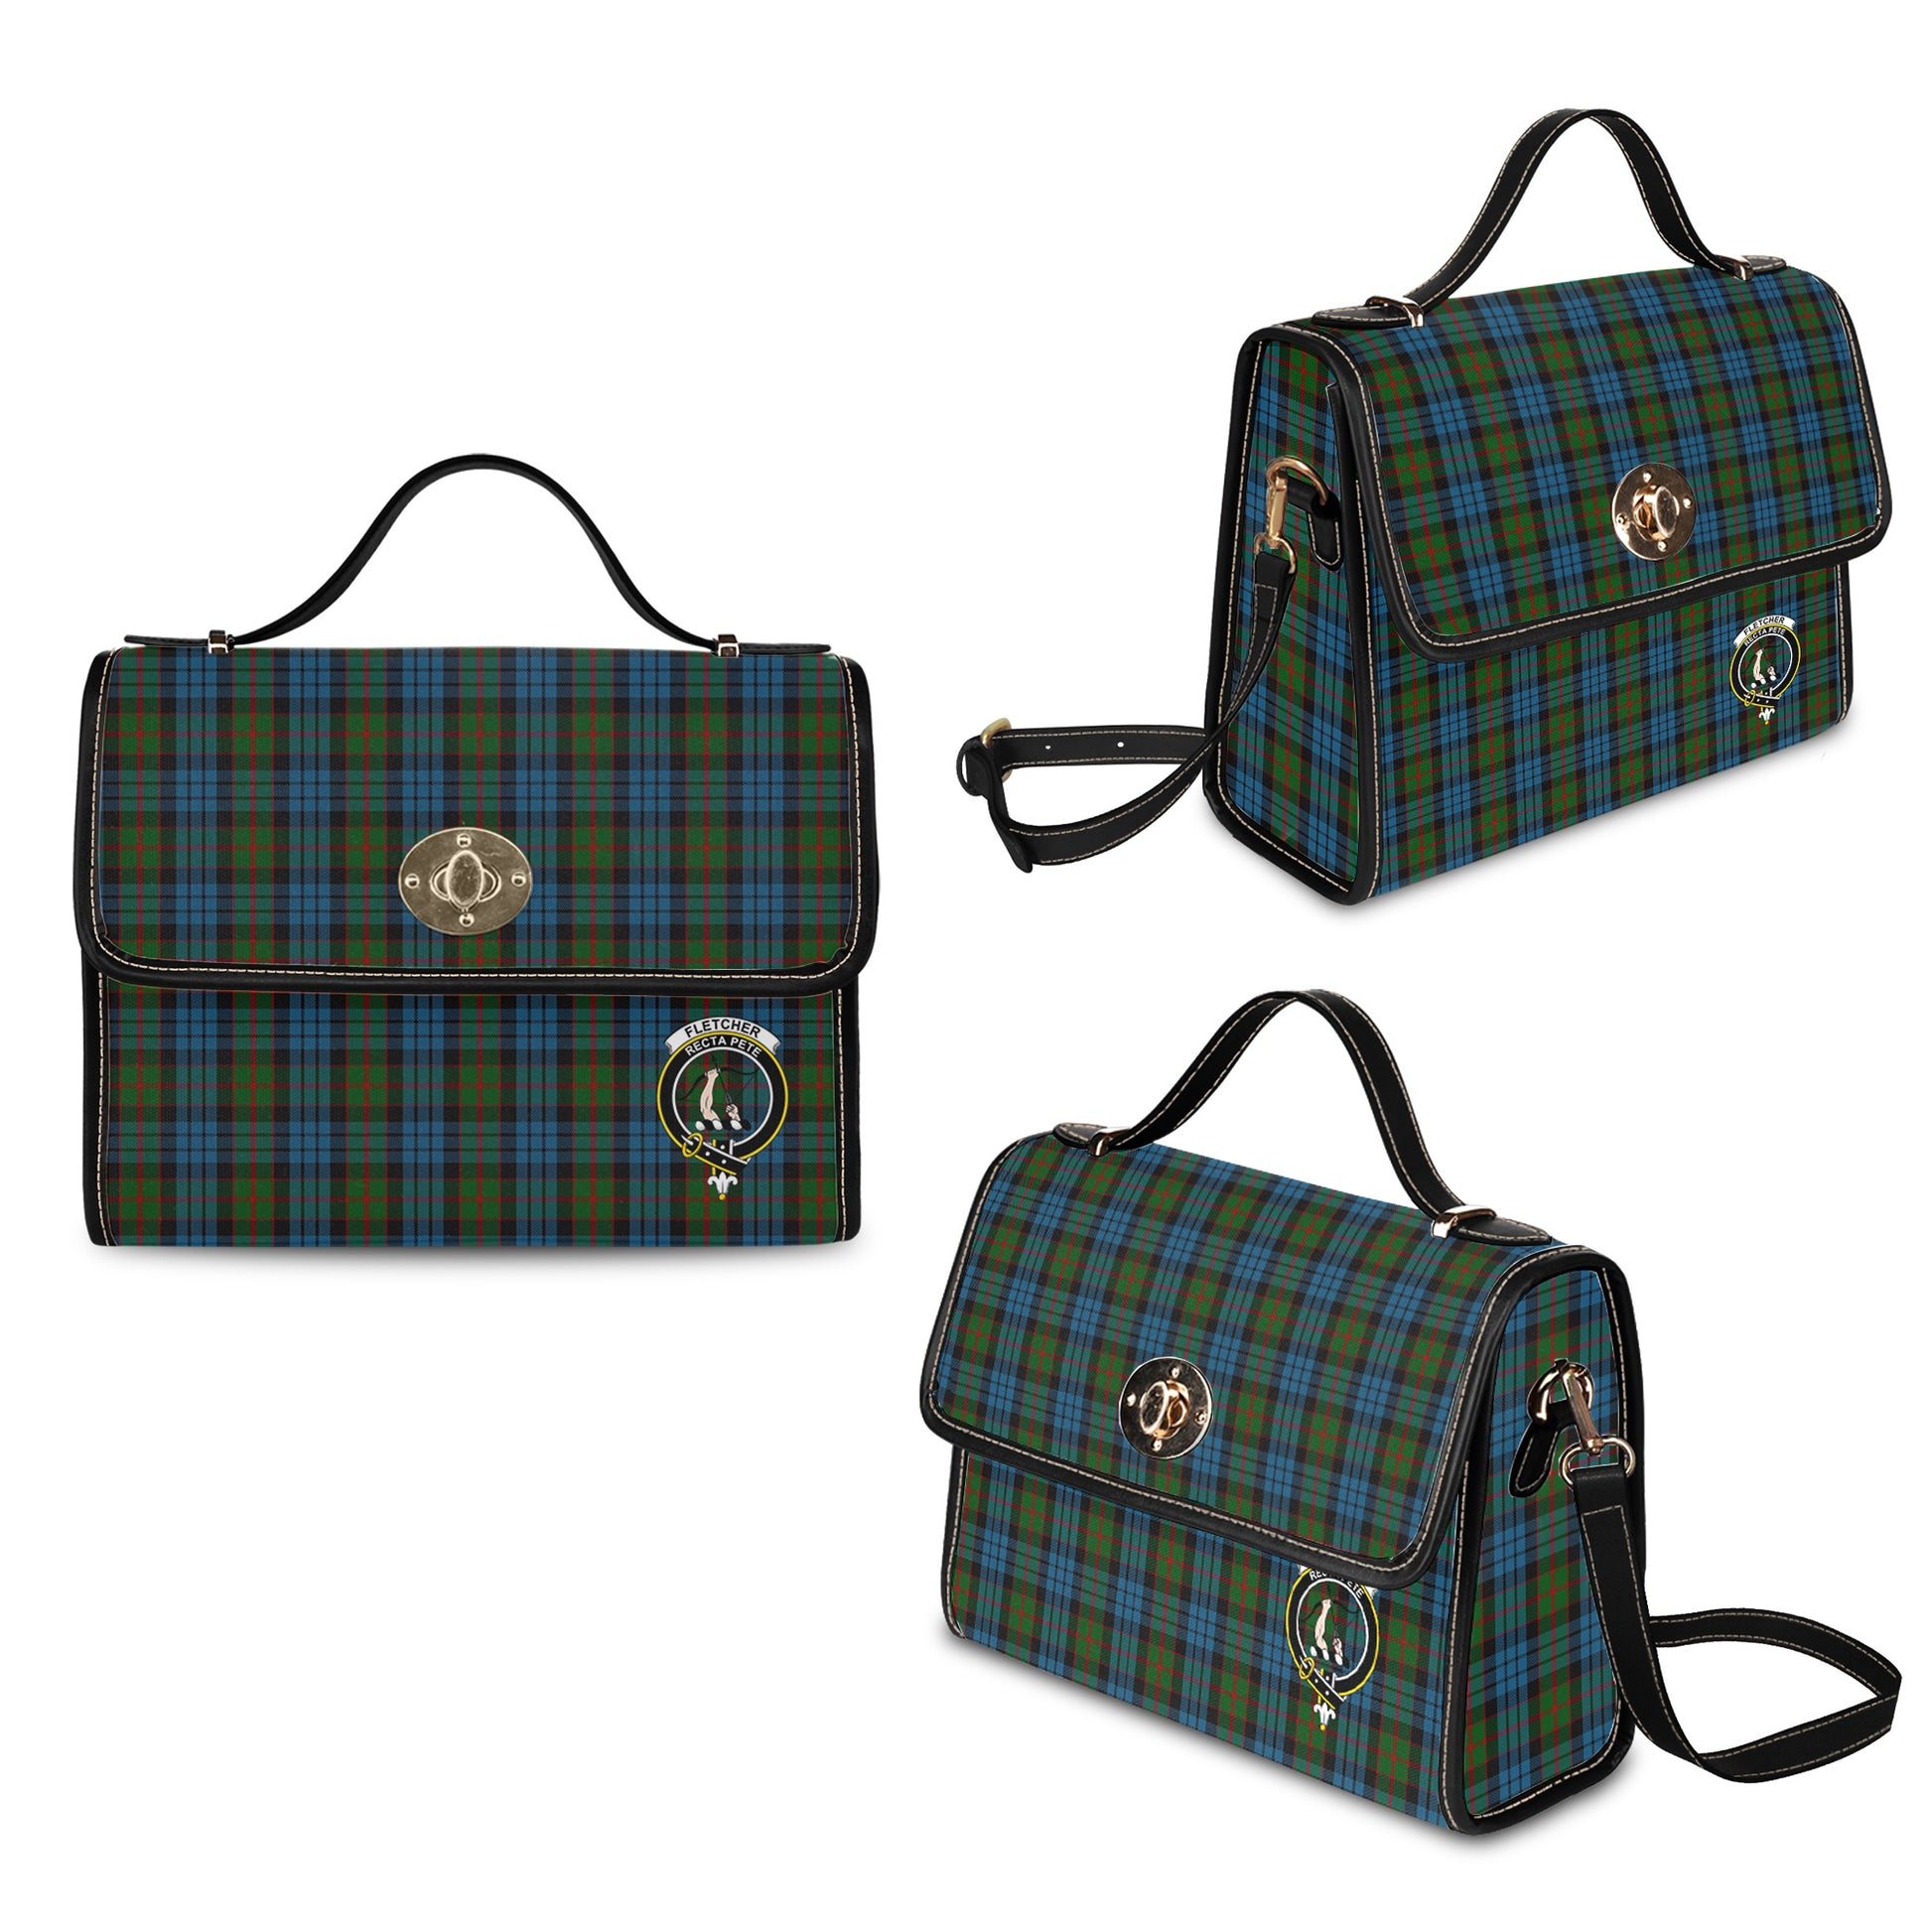 fletcher-of-dunans-tartan-leather-strap-waterproof-canvas-bag-with-family-crest